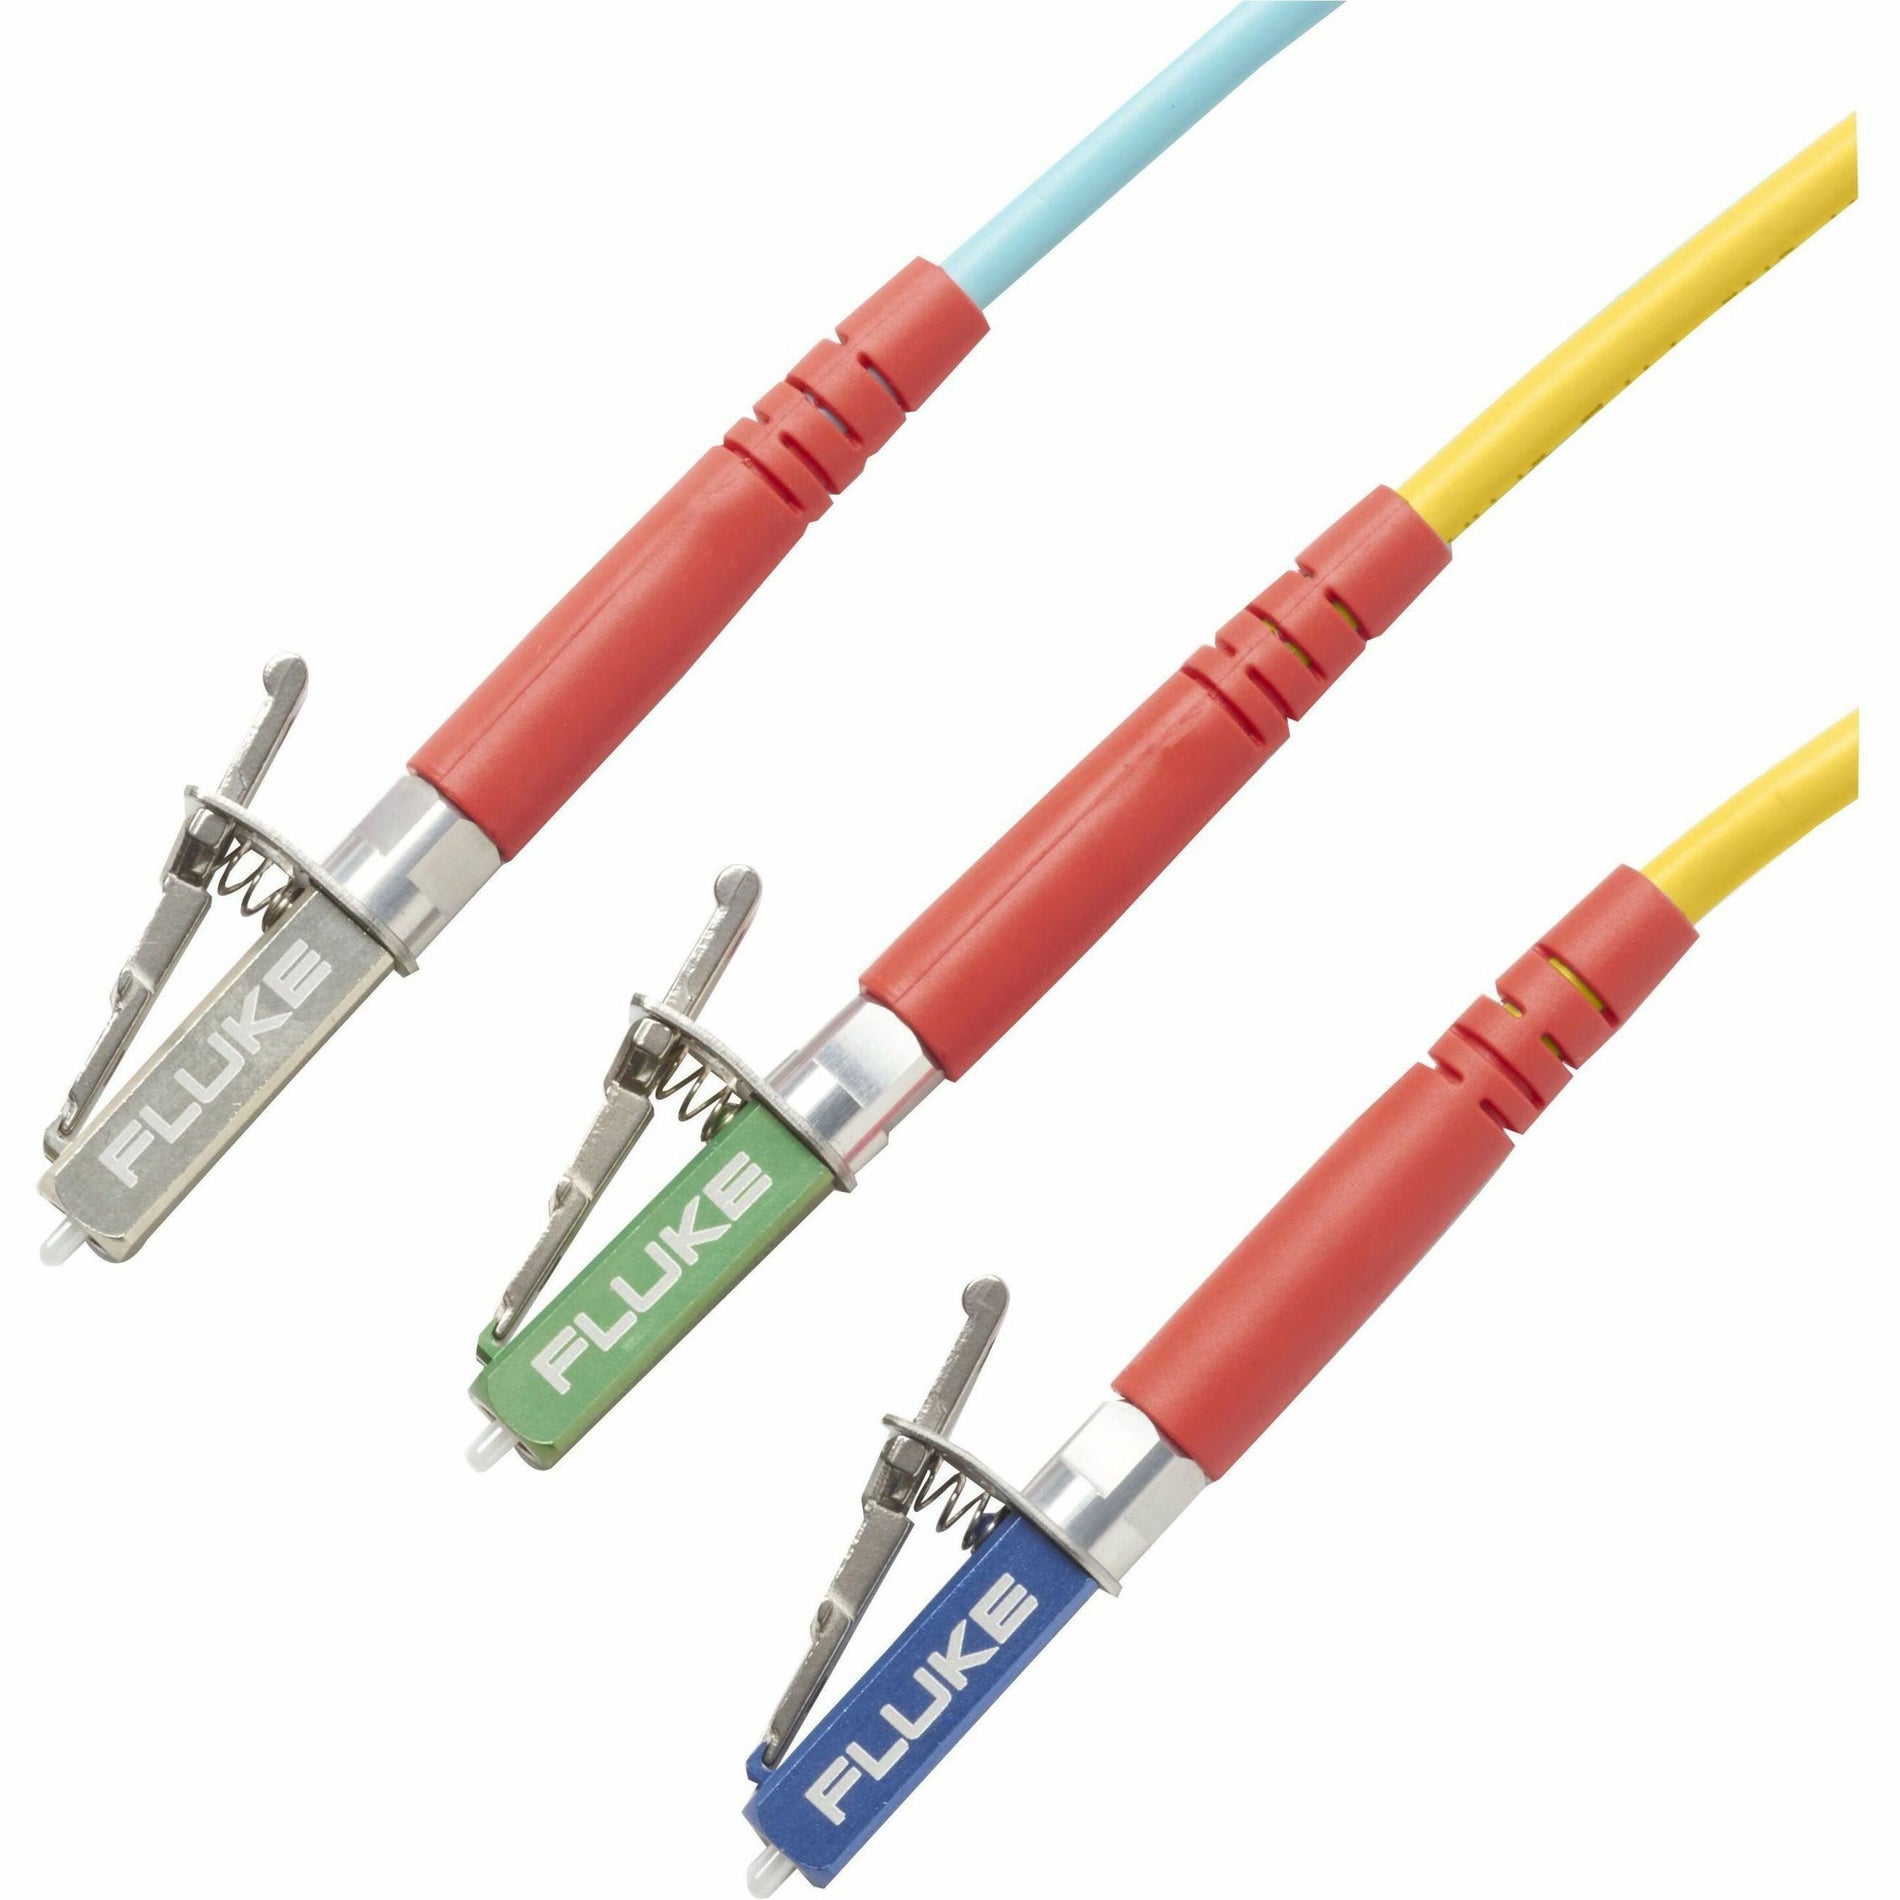 Fluke Networks SRC-9-LCLC-M Singlemode Test Reference Cord (2m), LC/LC Fiber Optic Cable, 6.56 ft